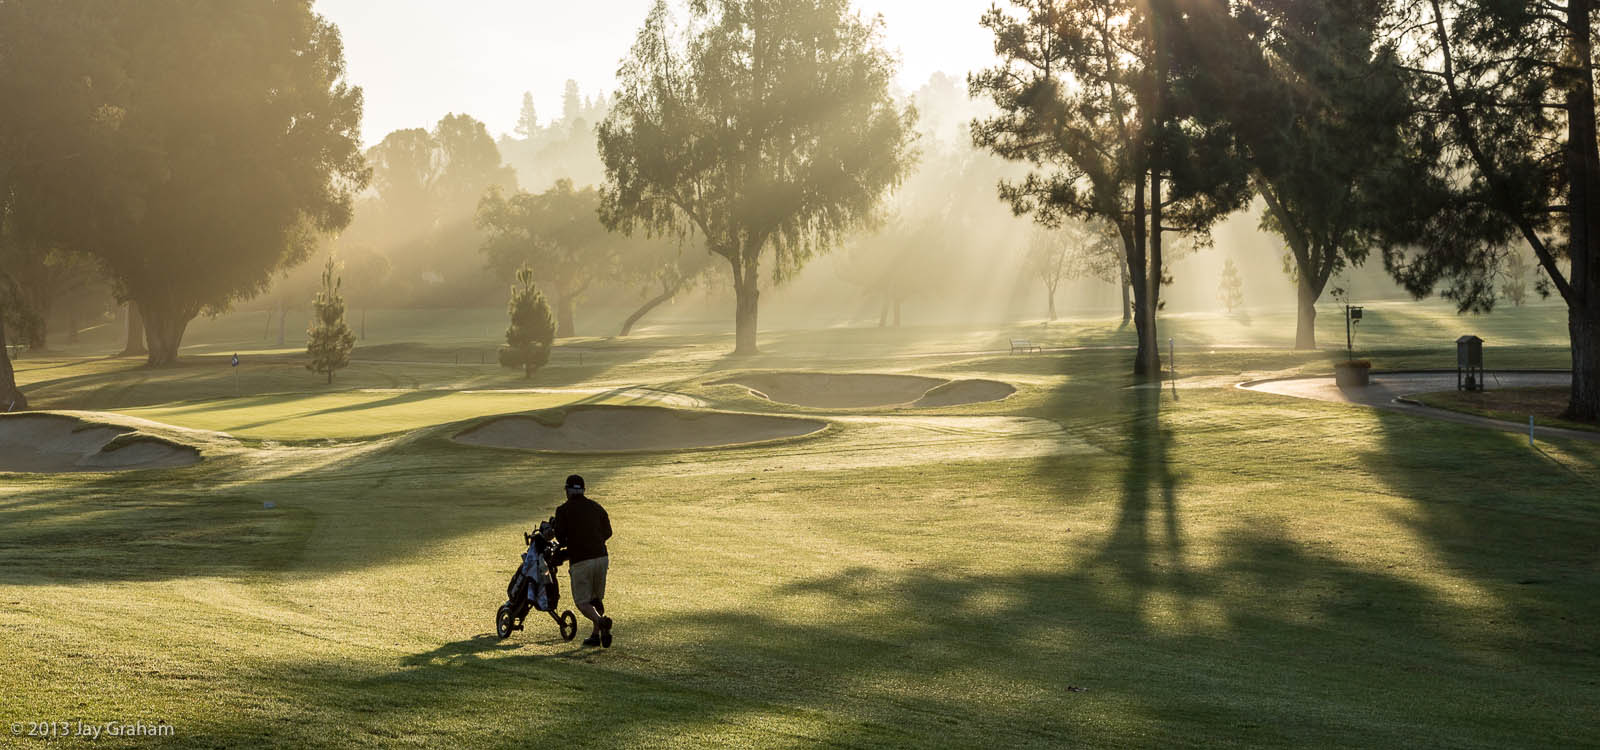 An early morning golfer enjoying the perfect early light. Photo © 2013 Jay Graham, all rights reserved